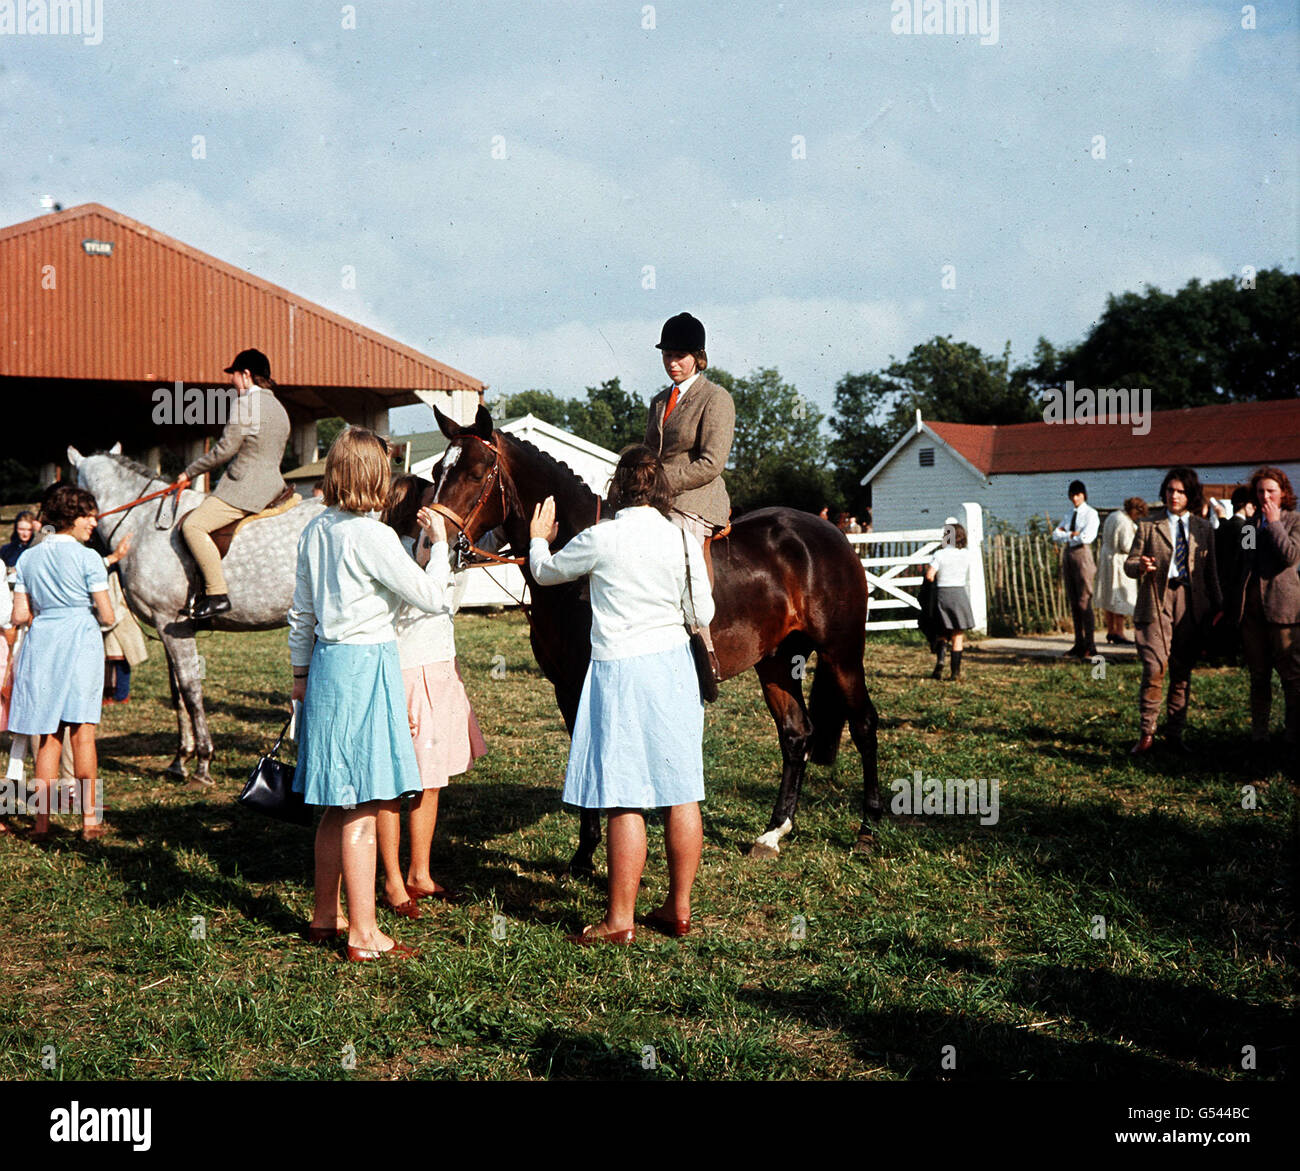 PRINCESS ON HORSEBACK 1964: Princess Anne (later the Princess Royal),13, represents her school, Benenden, for the first time in a showjumping competition. Stock Photo